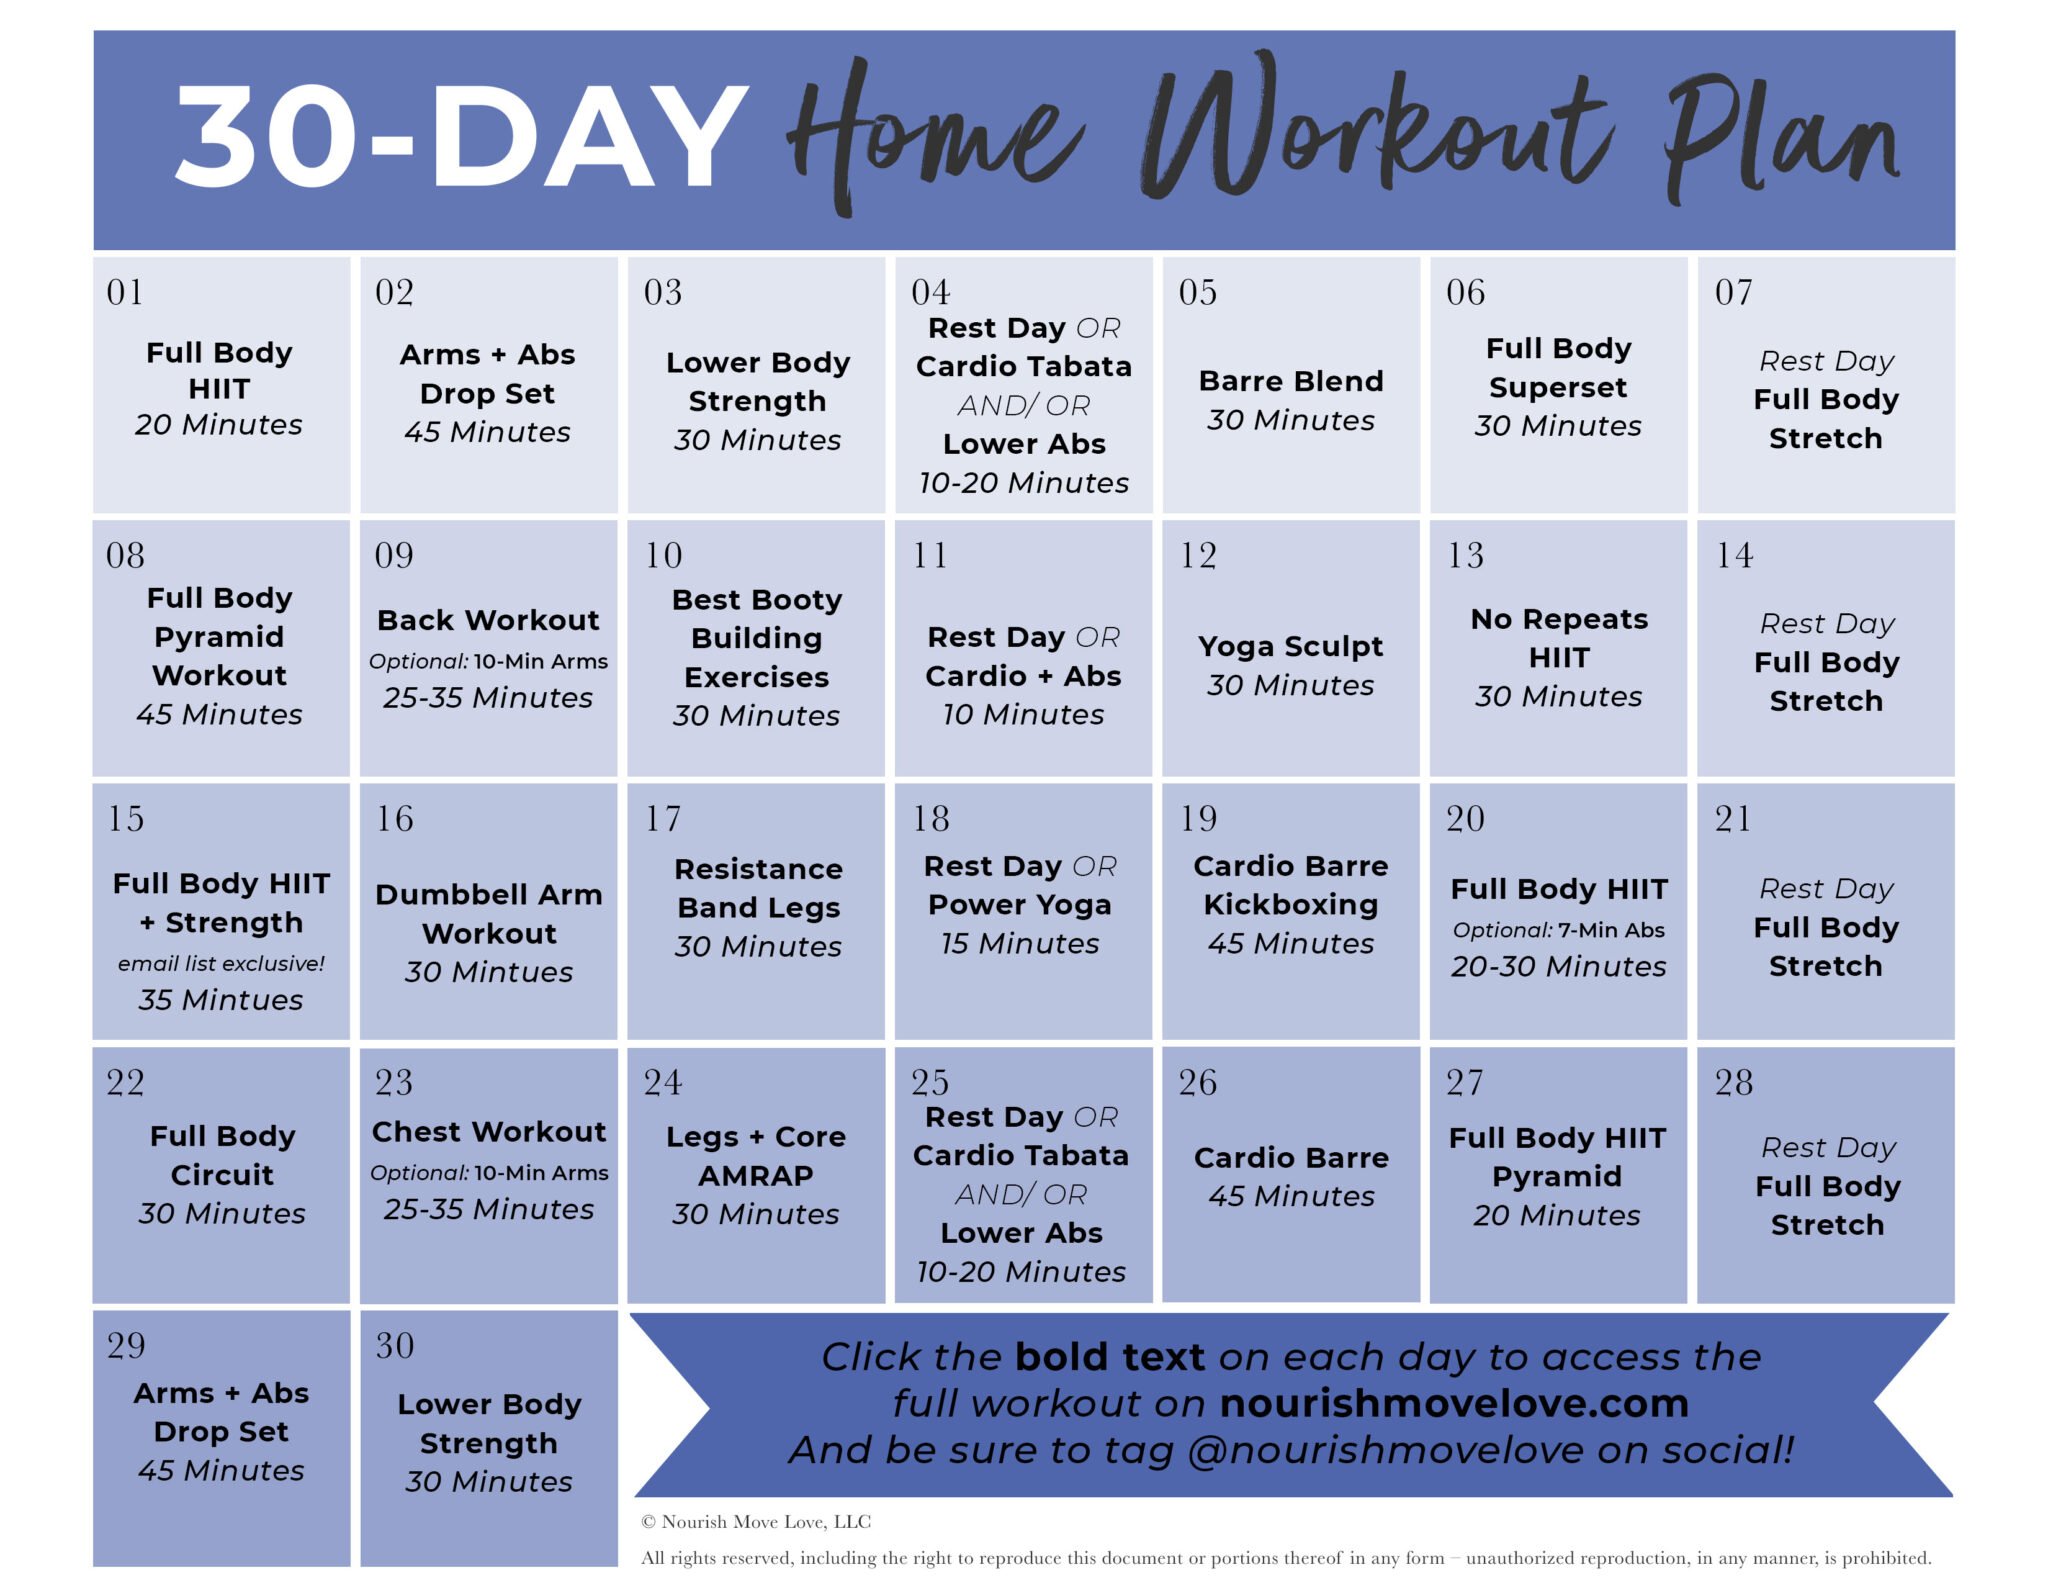 30 Day Workout Plan + Home Workout Routine | Nourish Move Love